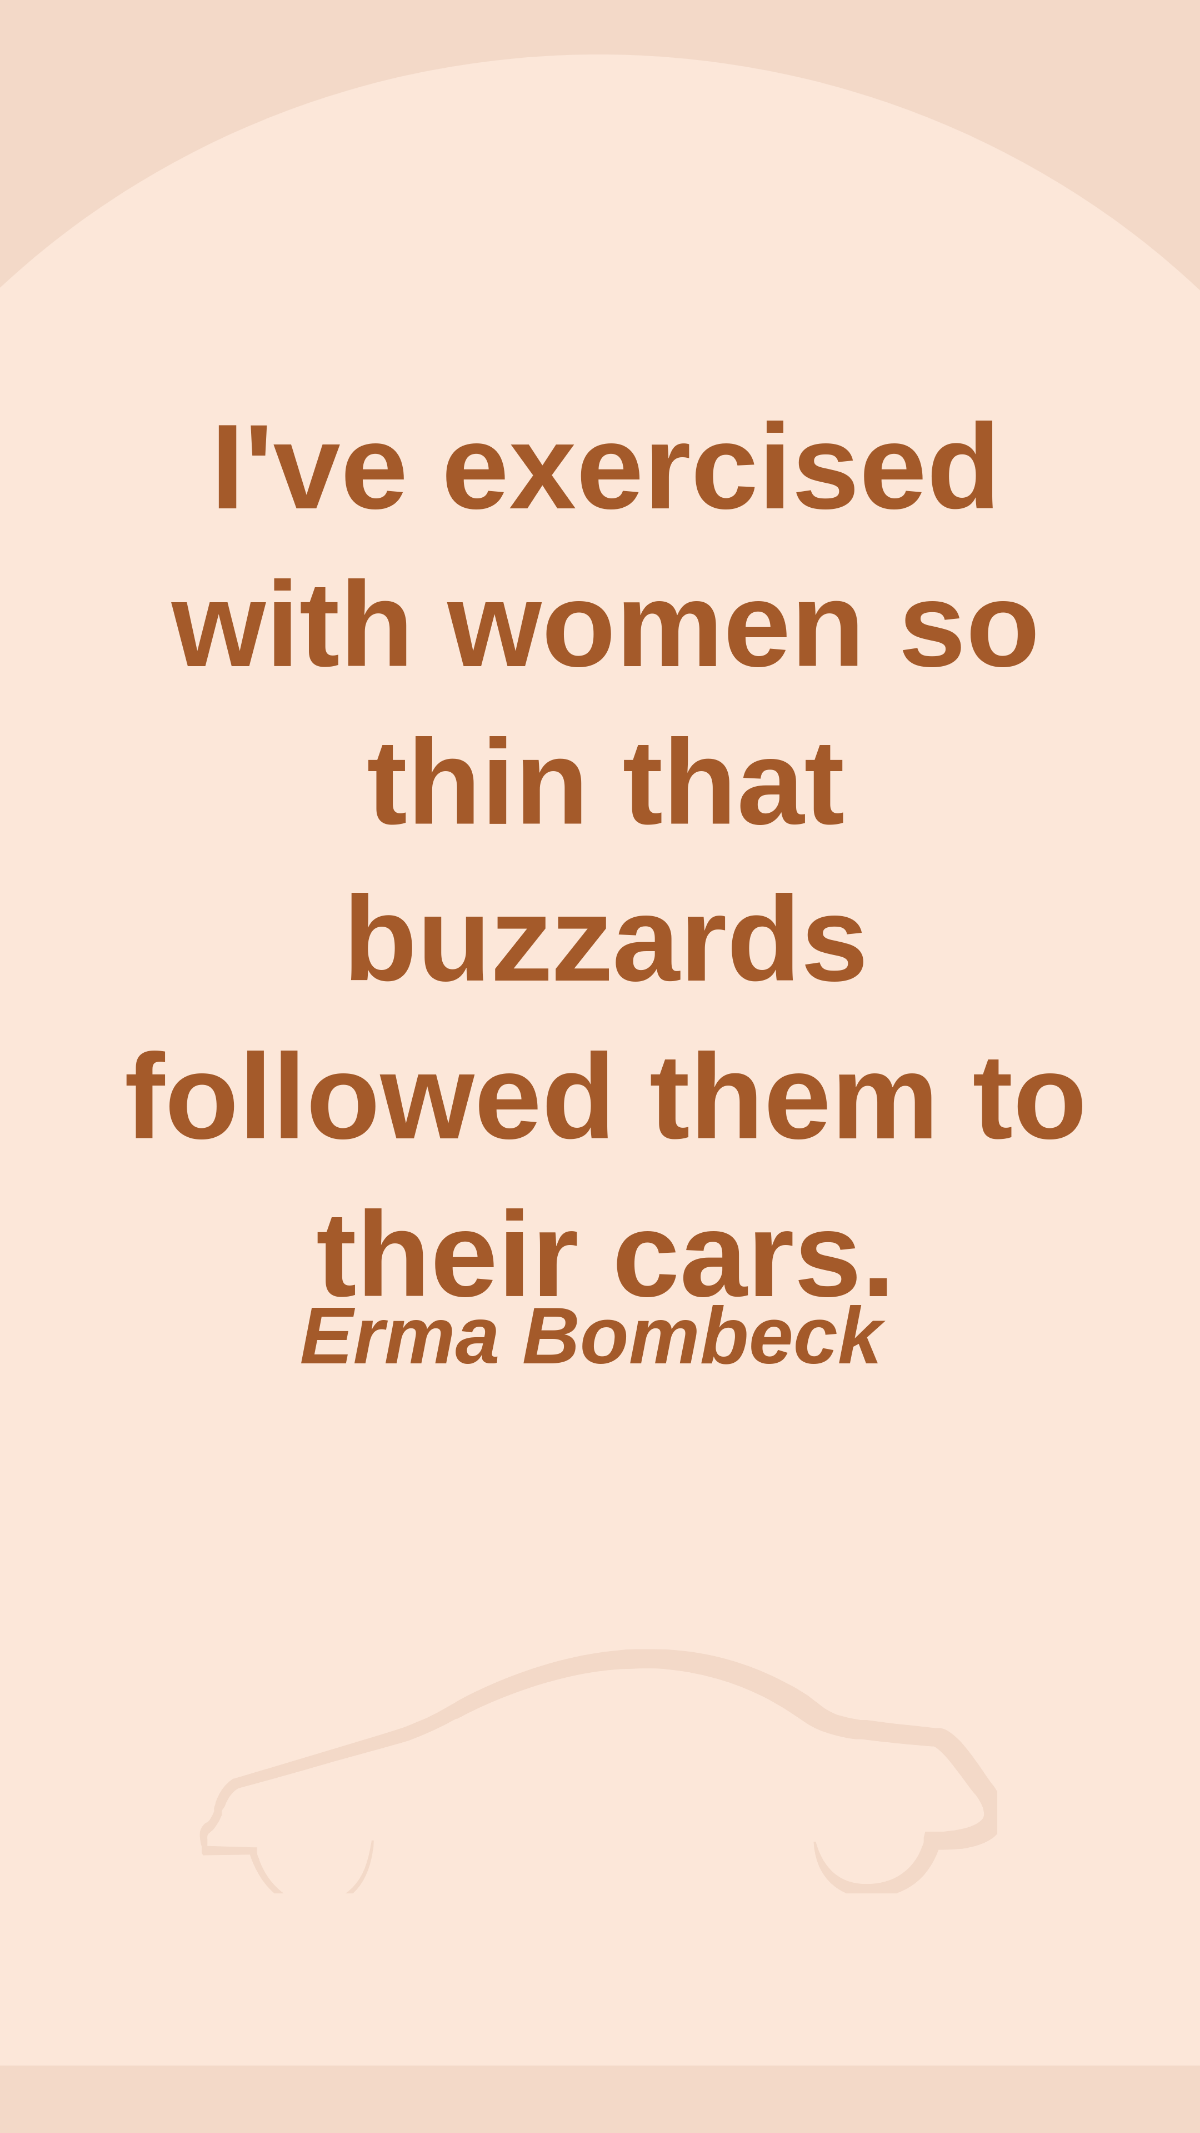 Erma Bombeck - I've exercised with women so thin that buzzards followed them to their cars. Template